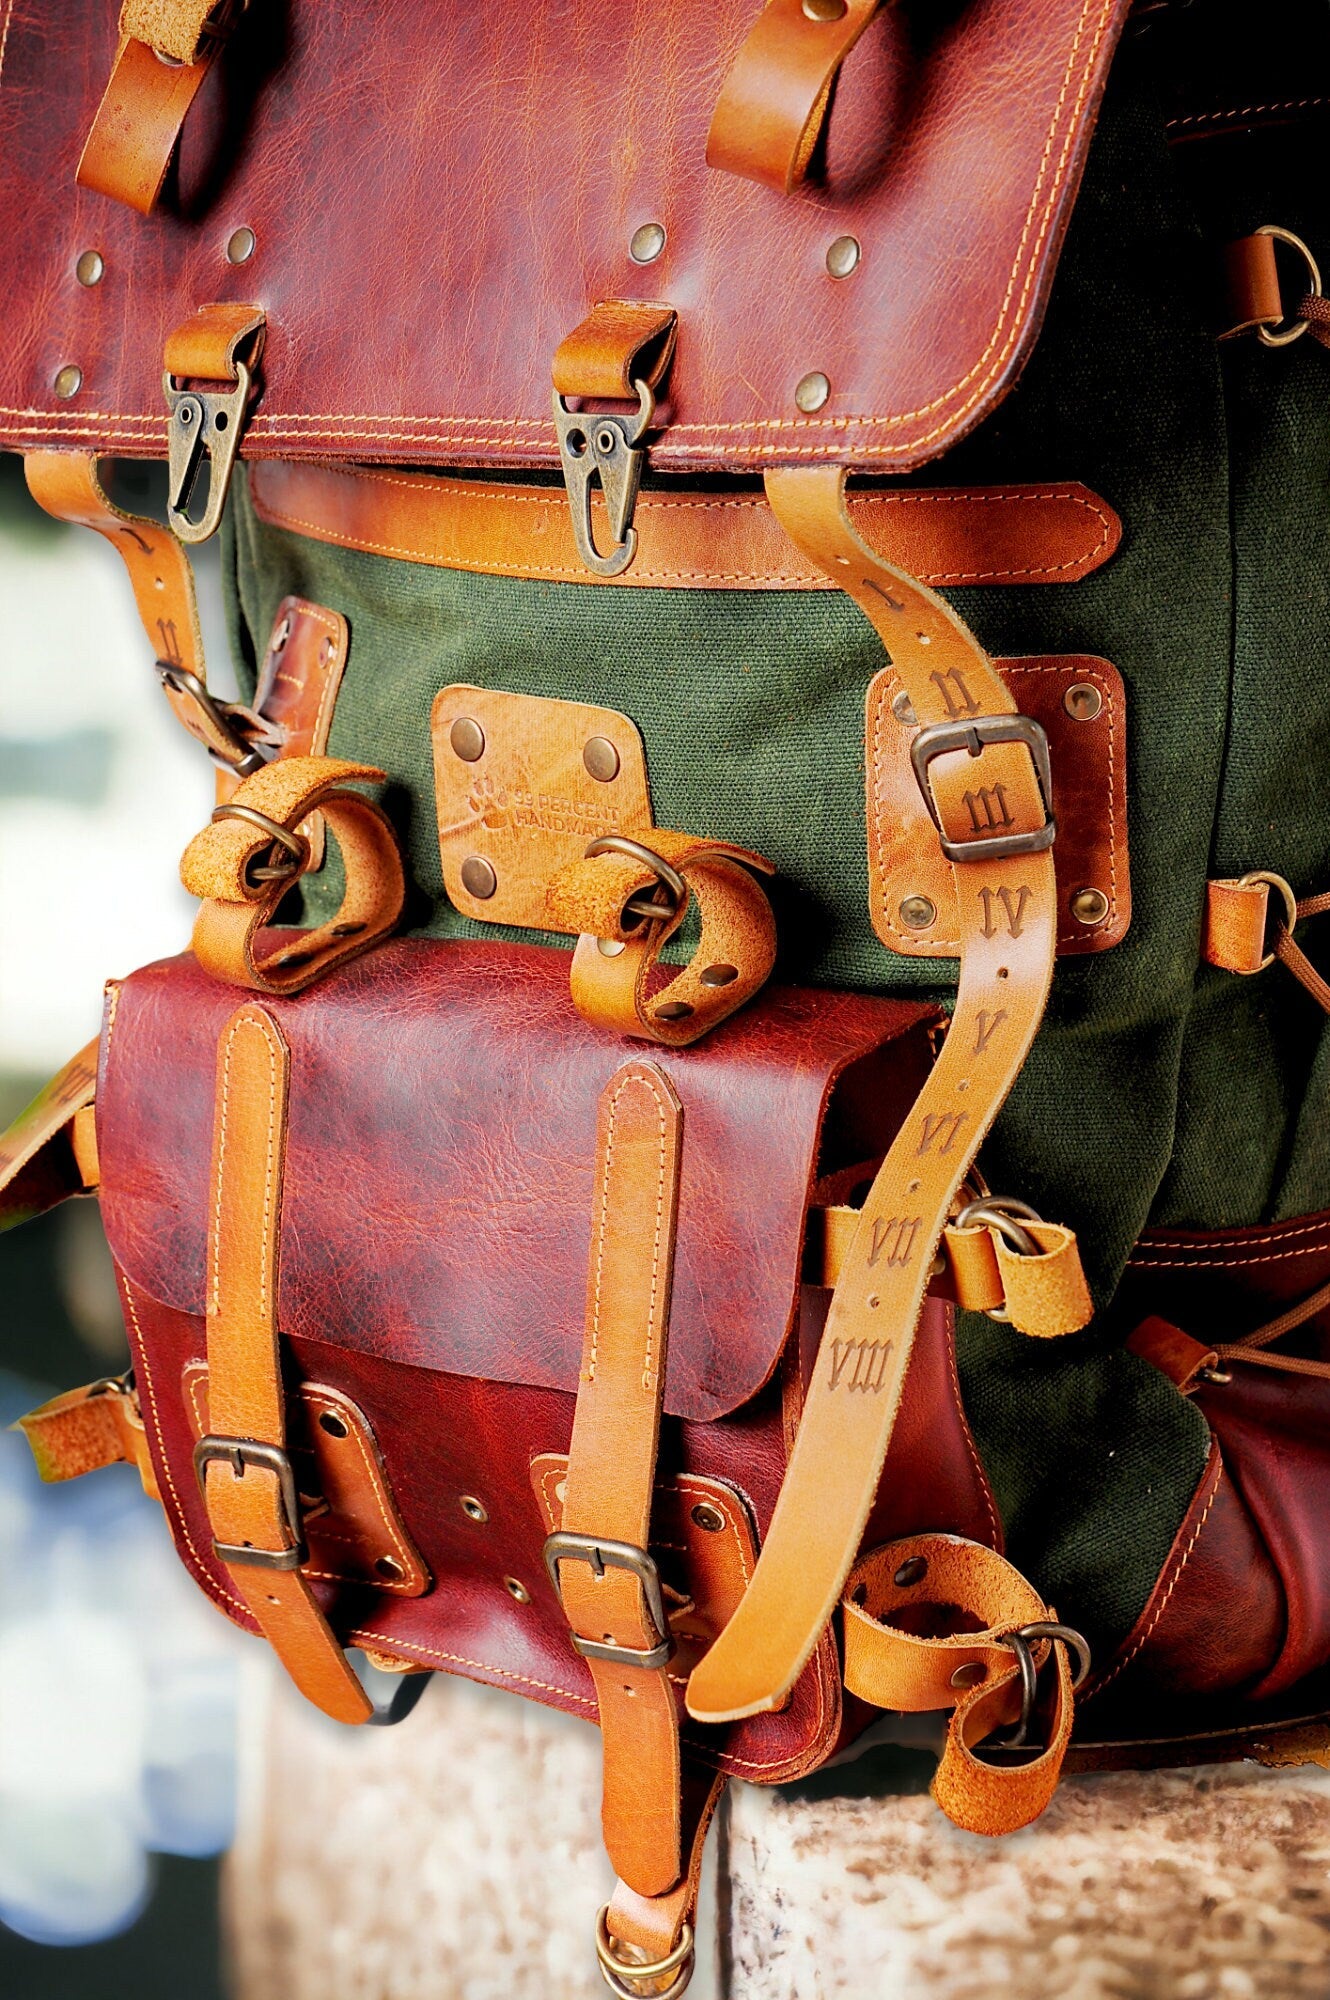 Premium Handmade Camping Backpack. Leather - Canvas Backpack